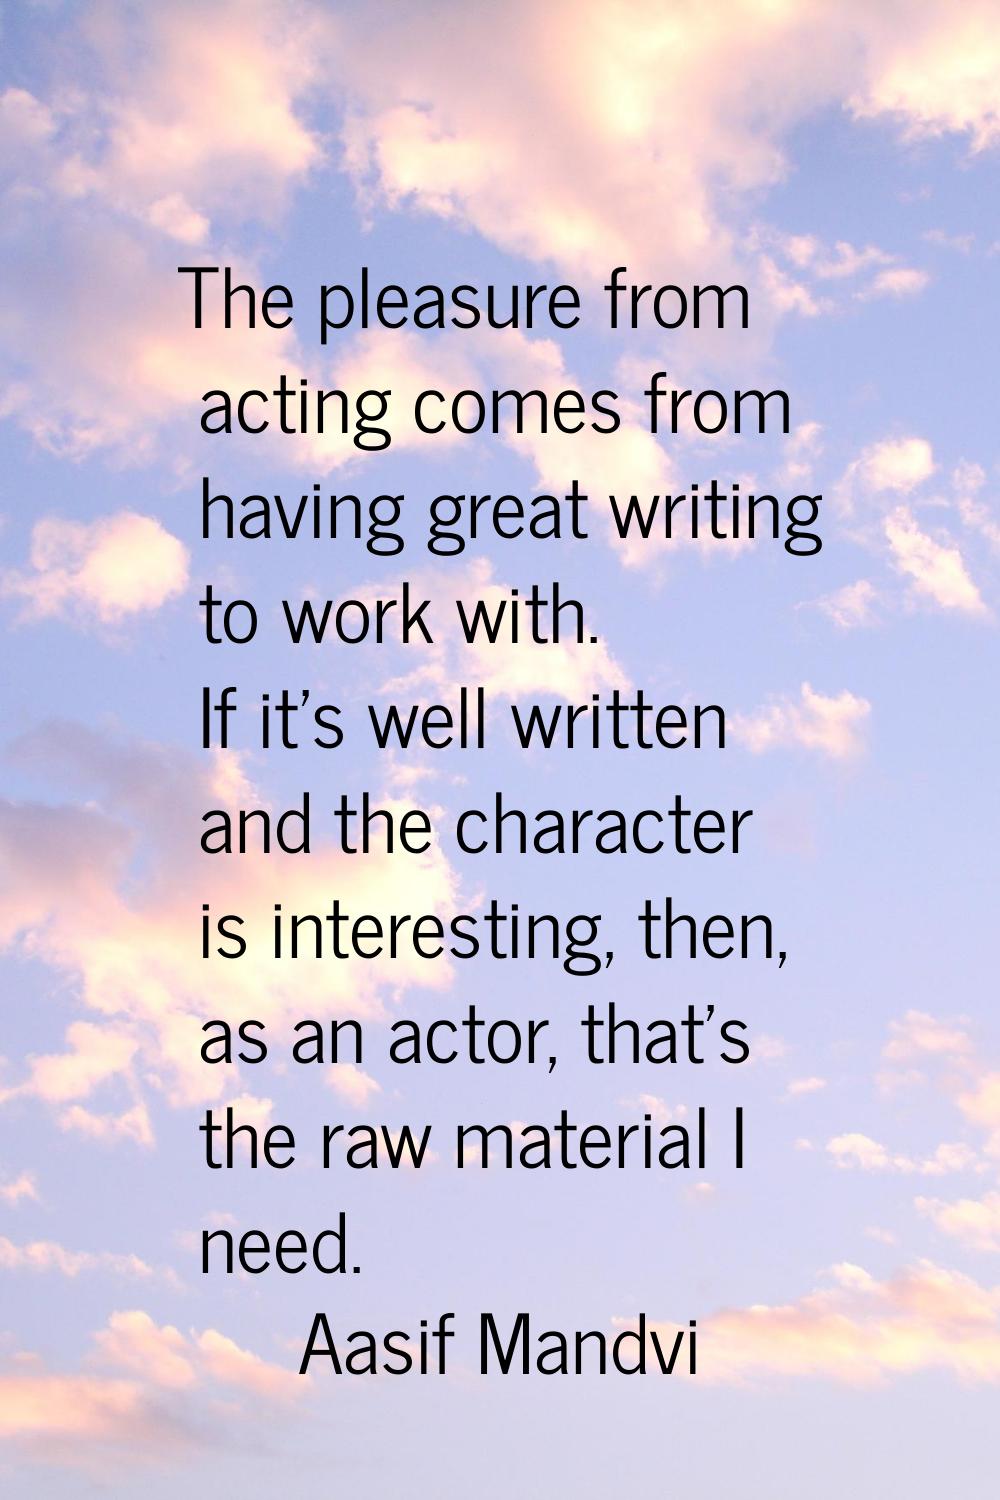 The pleasure from acting comes from having great writing to work with. If it's well written and the